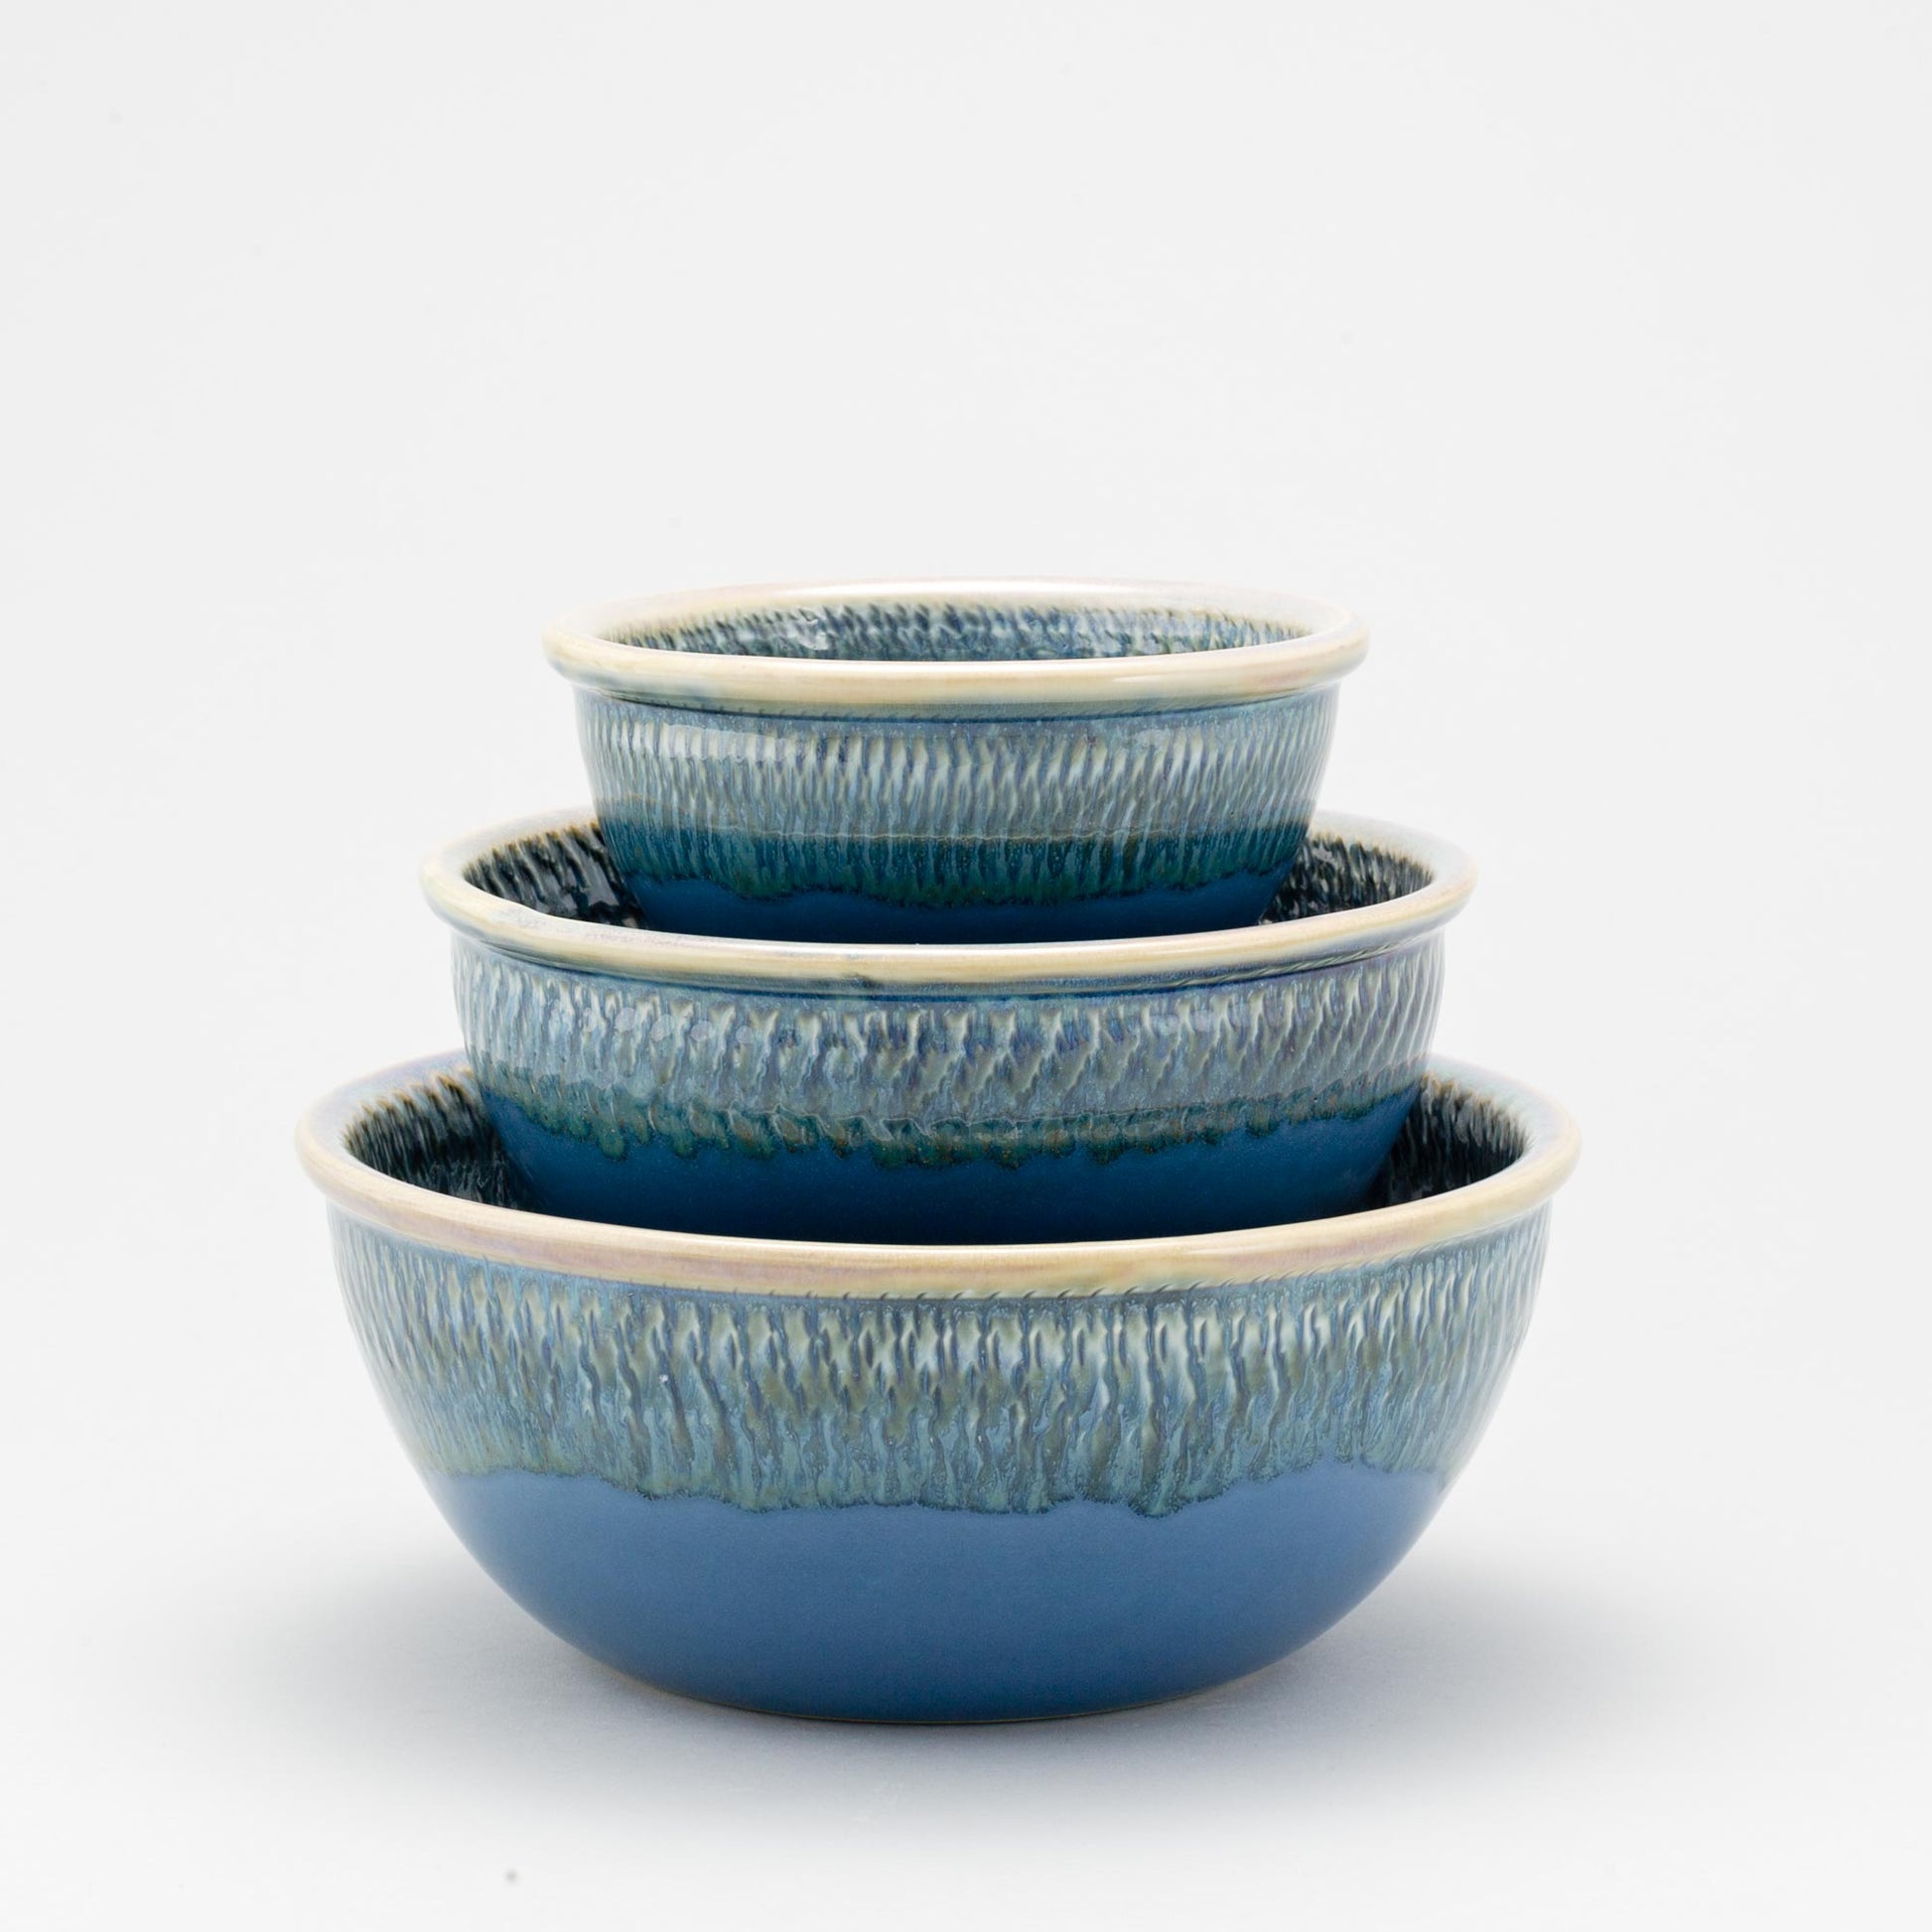 Handmade Pottery Mixing Bowl Set in Blue Oribe pattern made by Georgetown Pottery in Maine